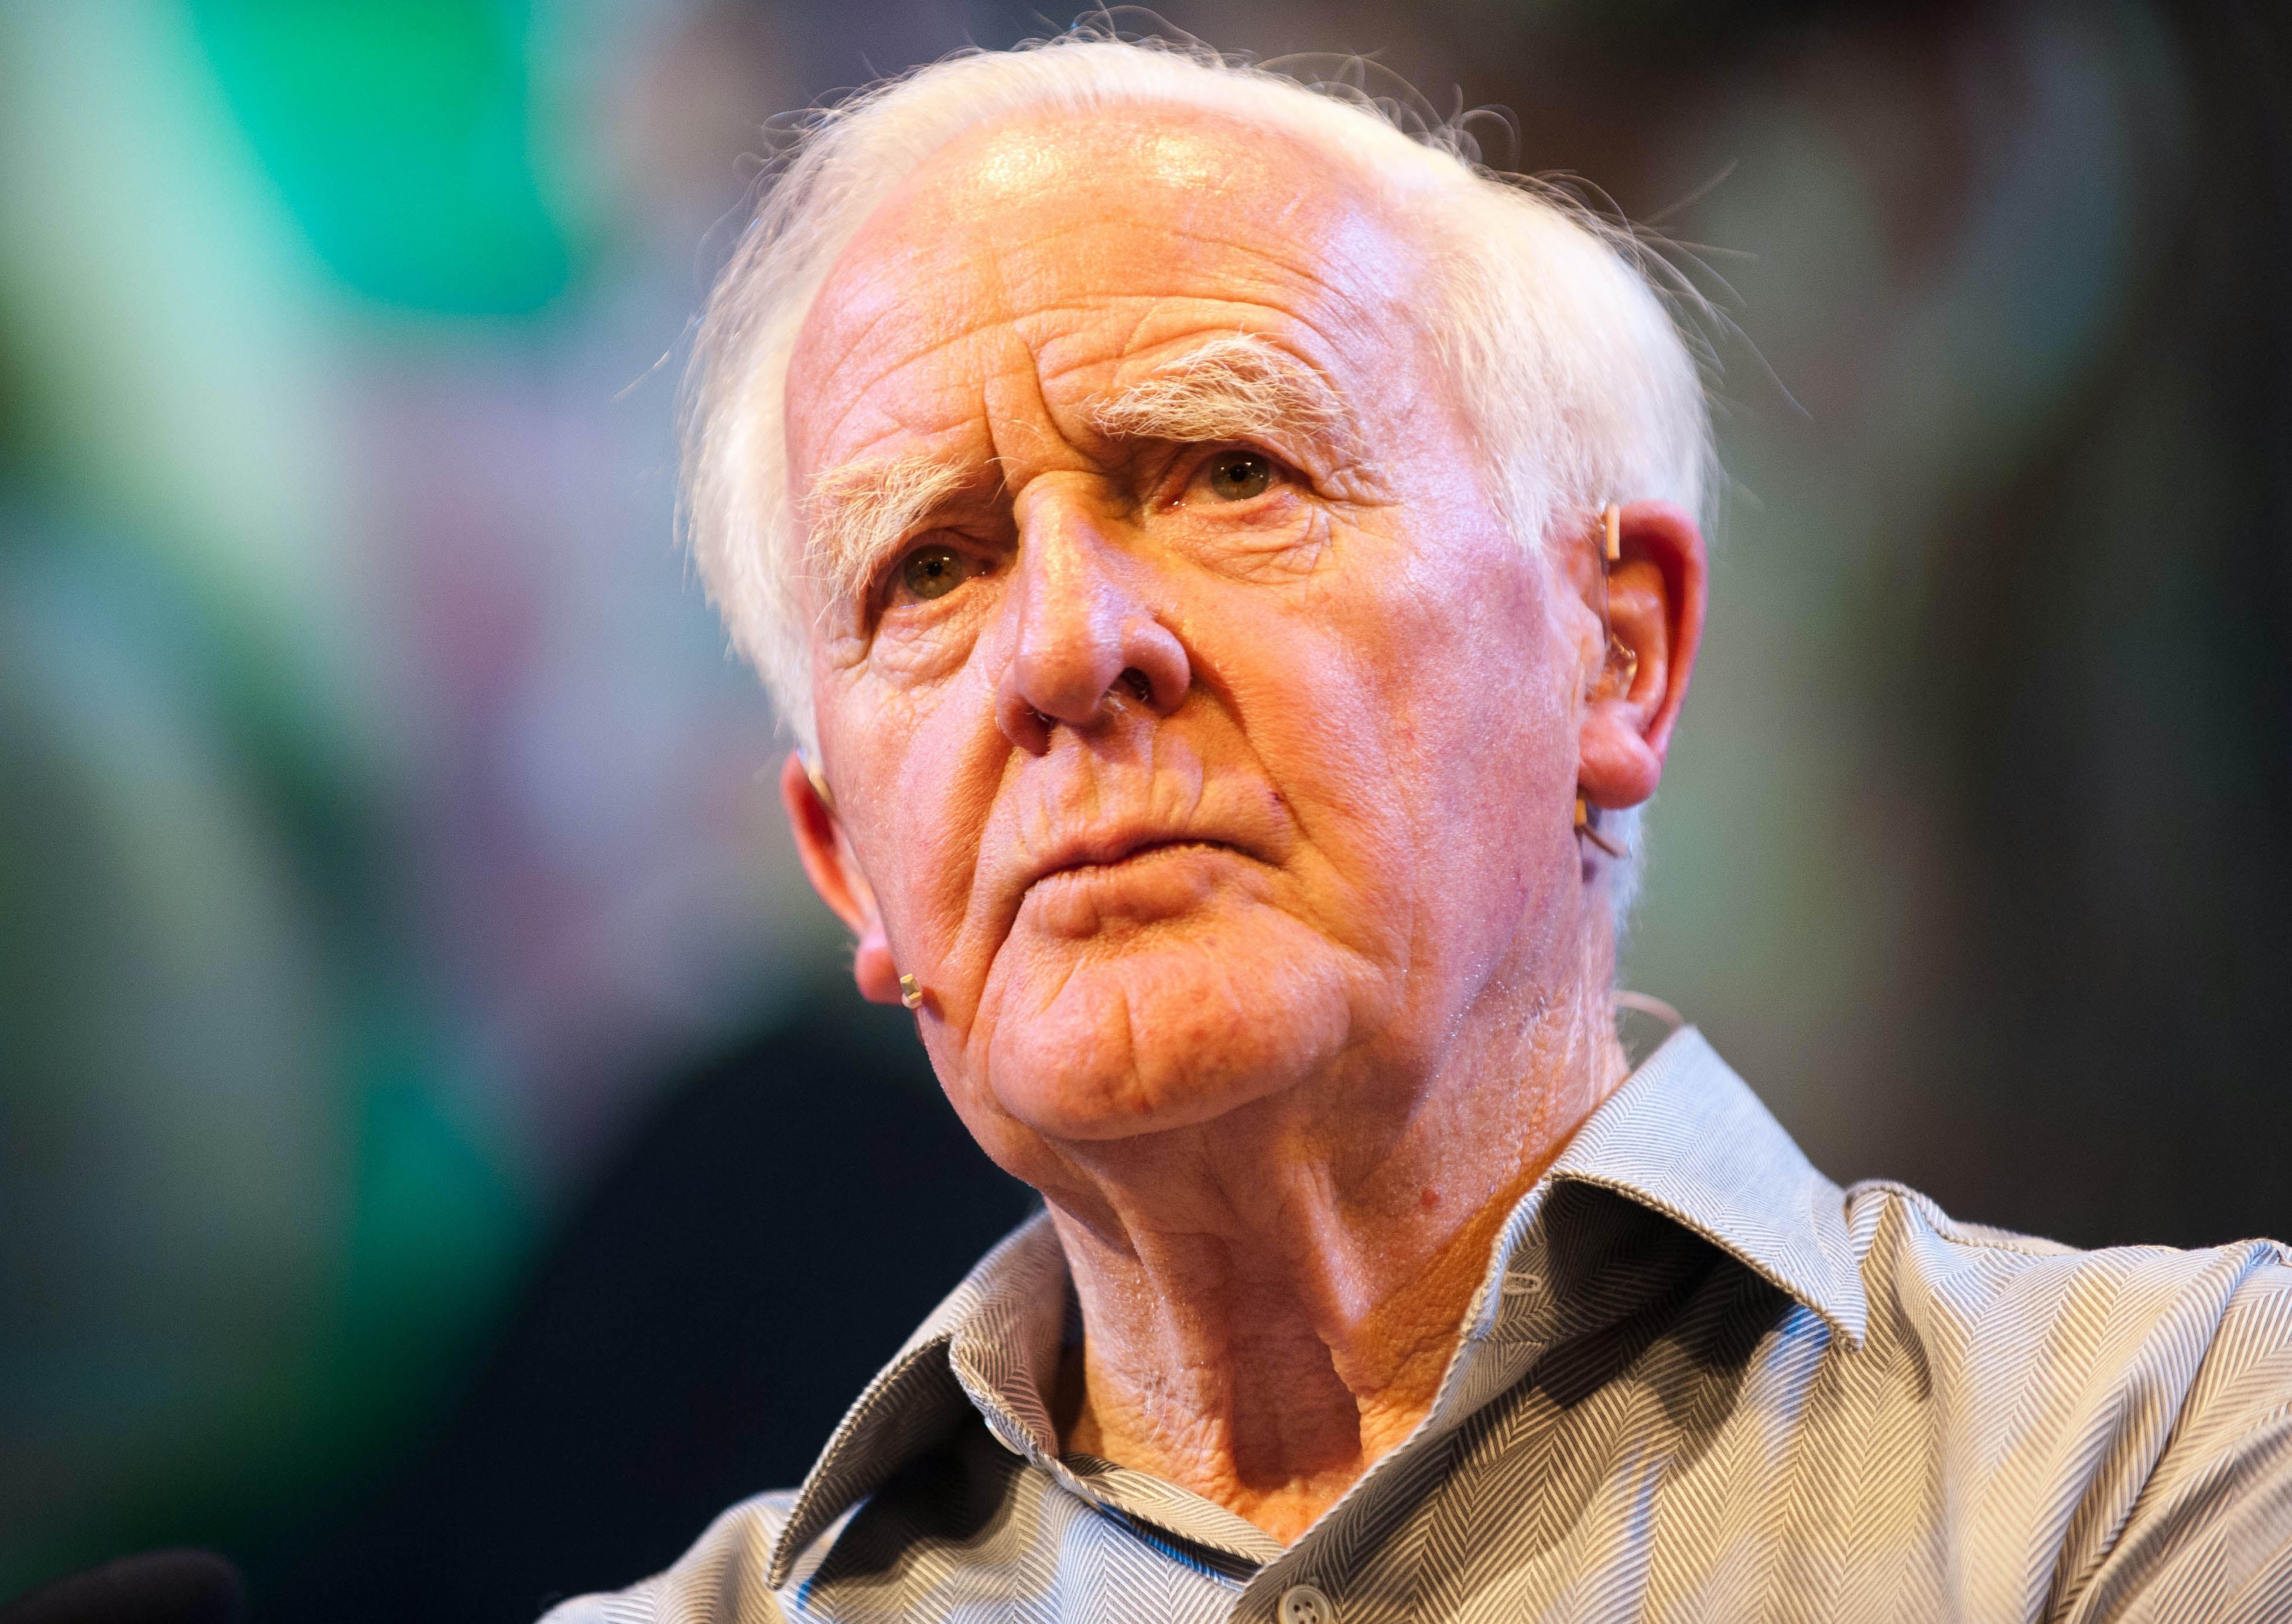 John Le Carre has died aged 89